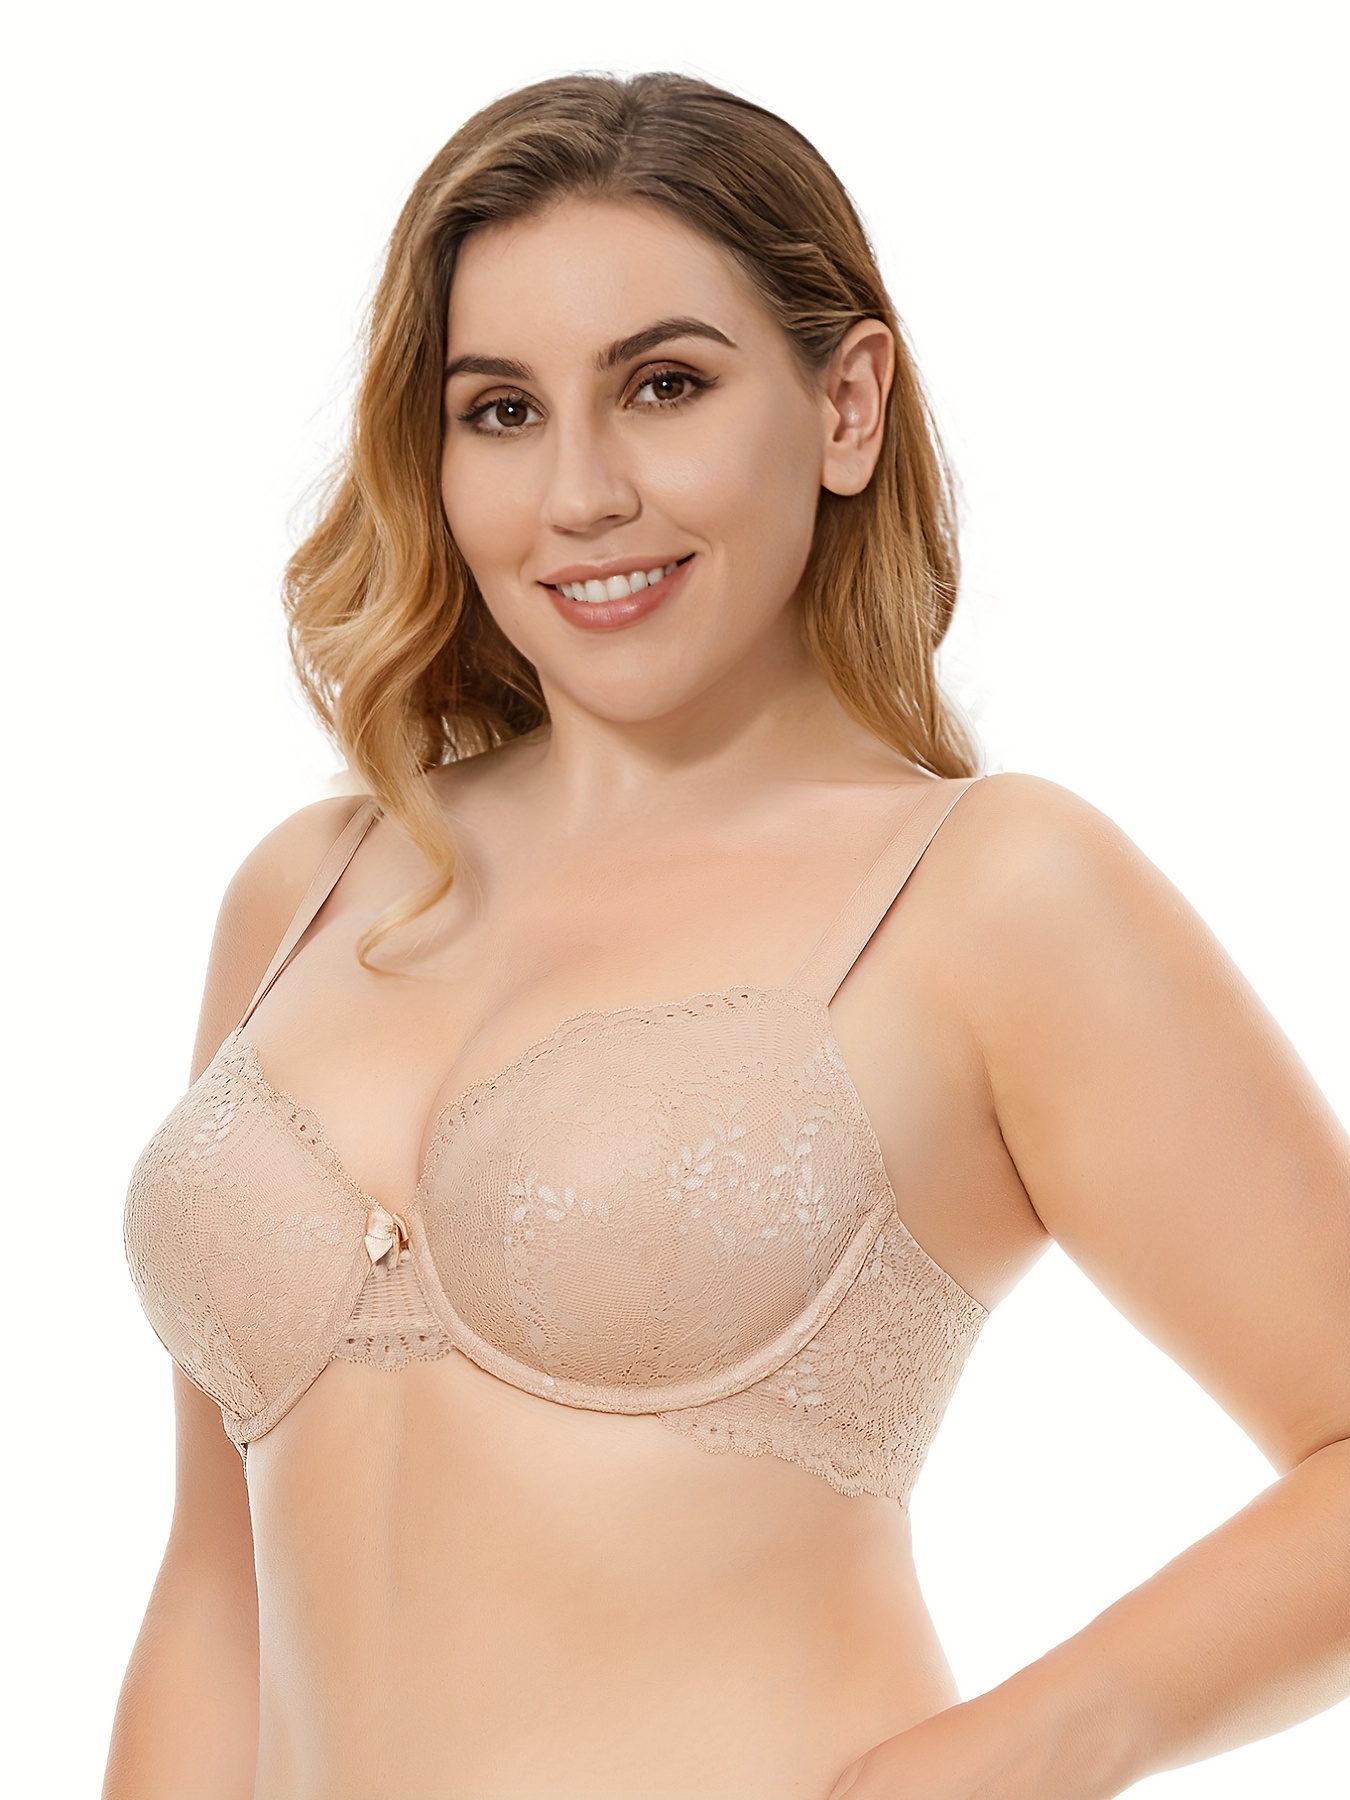 ILYS & More Underwire Padded Push Up Bra Lot Size 42D #D8559 – ASA College:  Florida